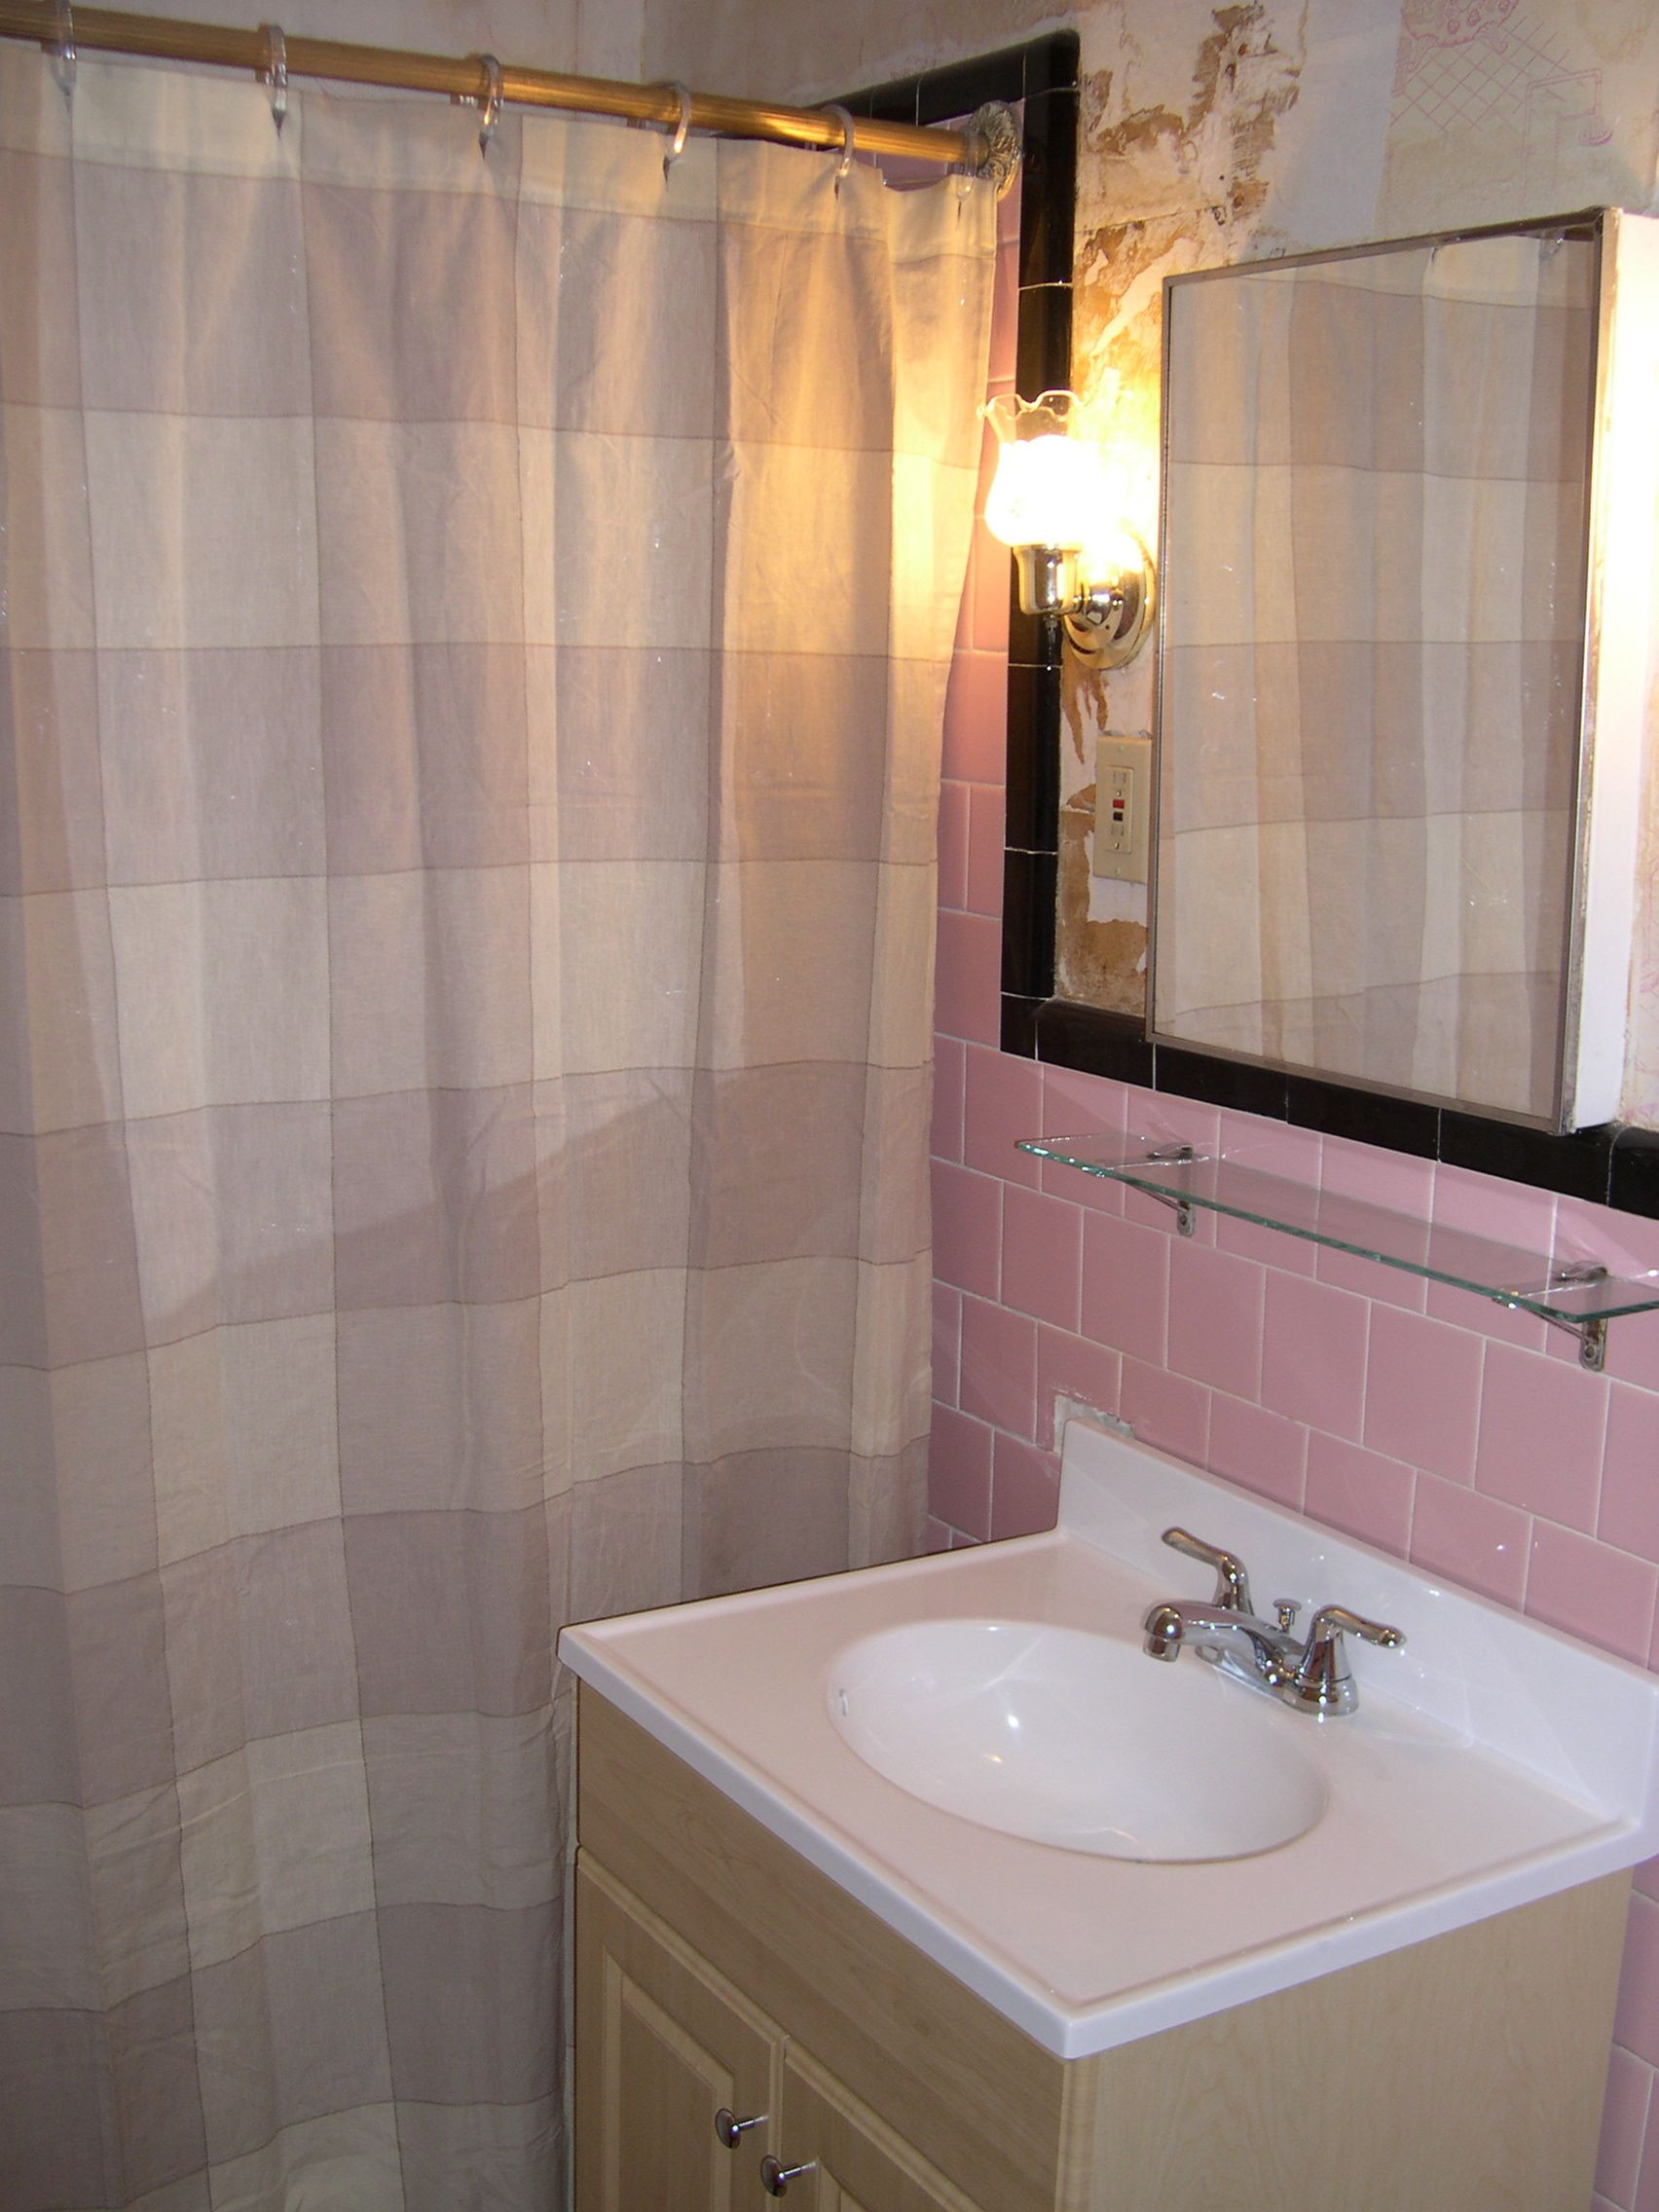 Covering Old Bathroom Tiles
 40 vintage pink bathroom tile ideas and pictures